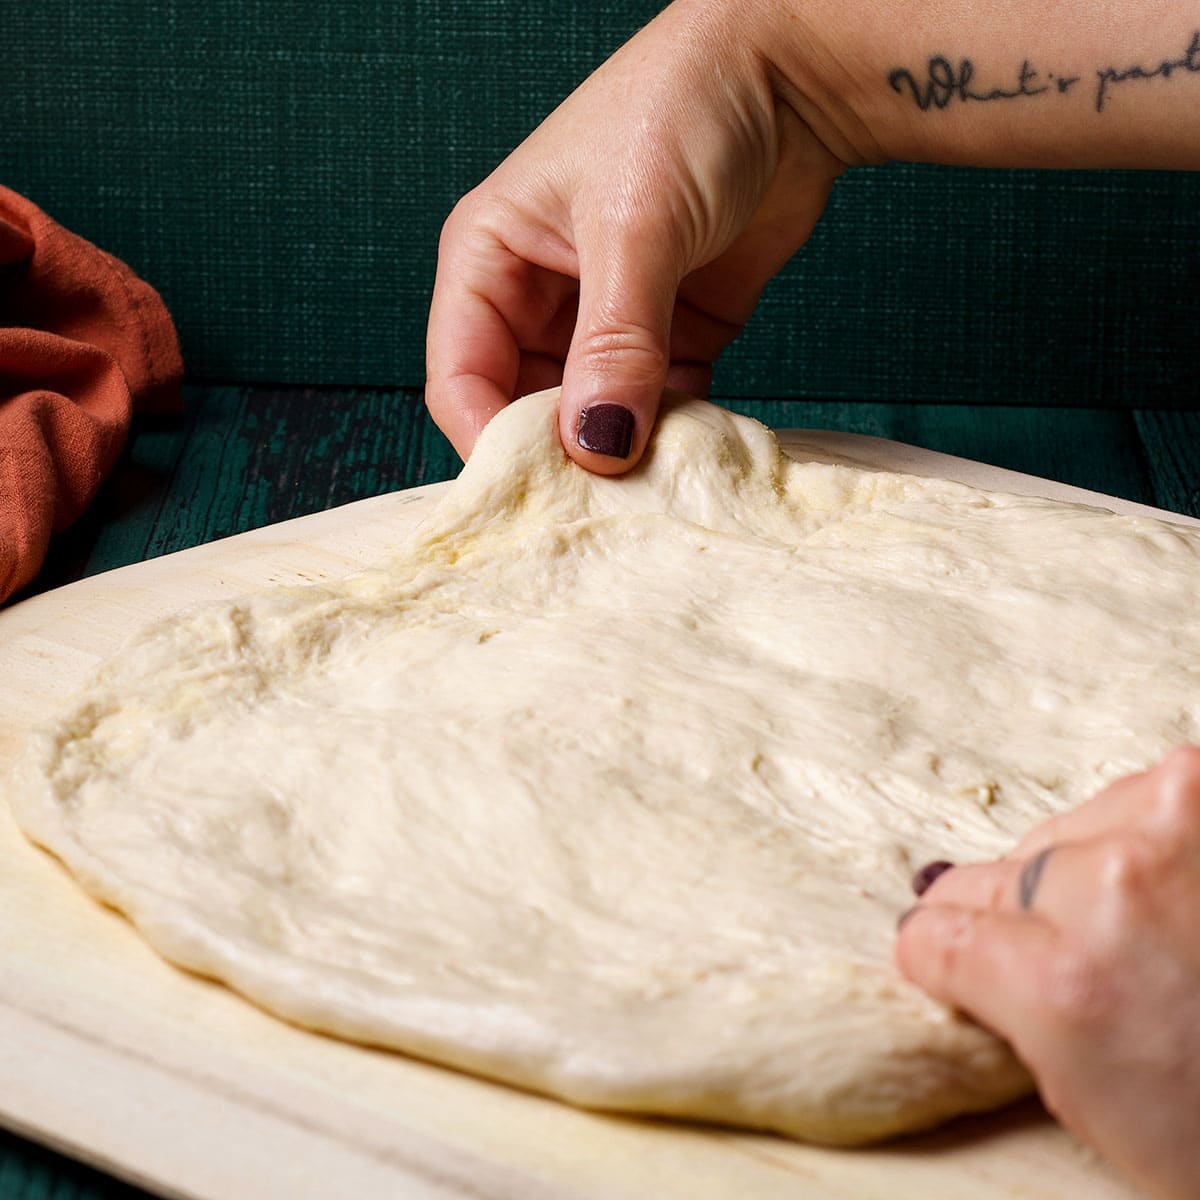 Use your hands to stretch the pizza dough out into a circle.